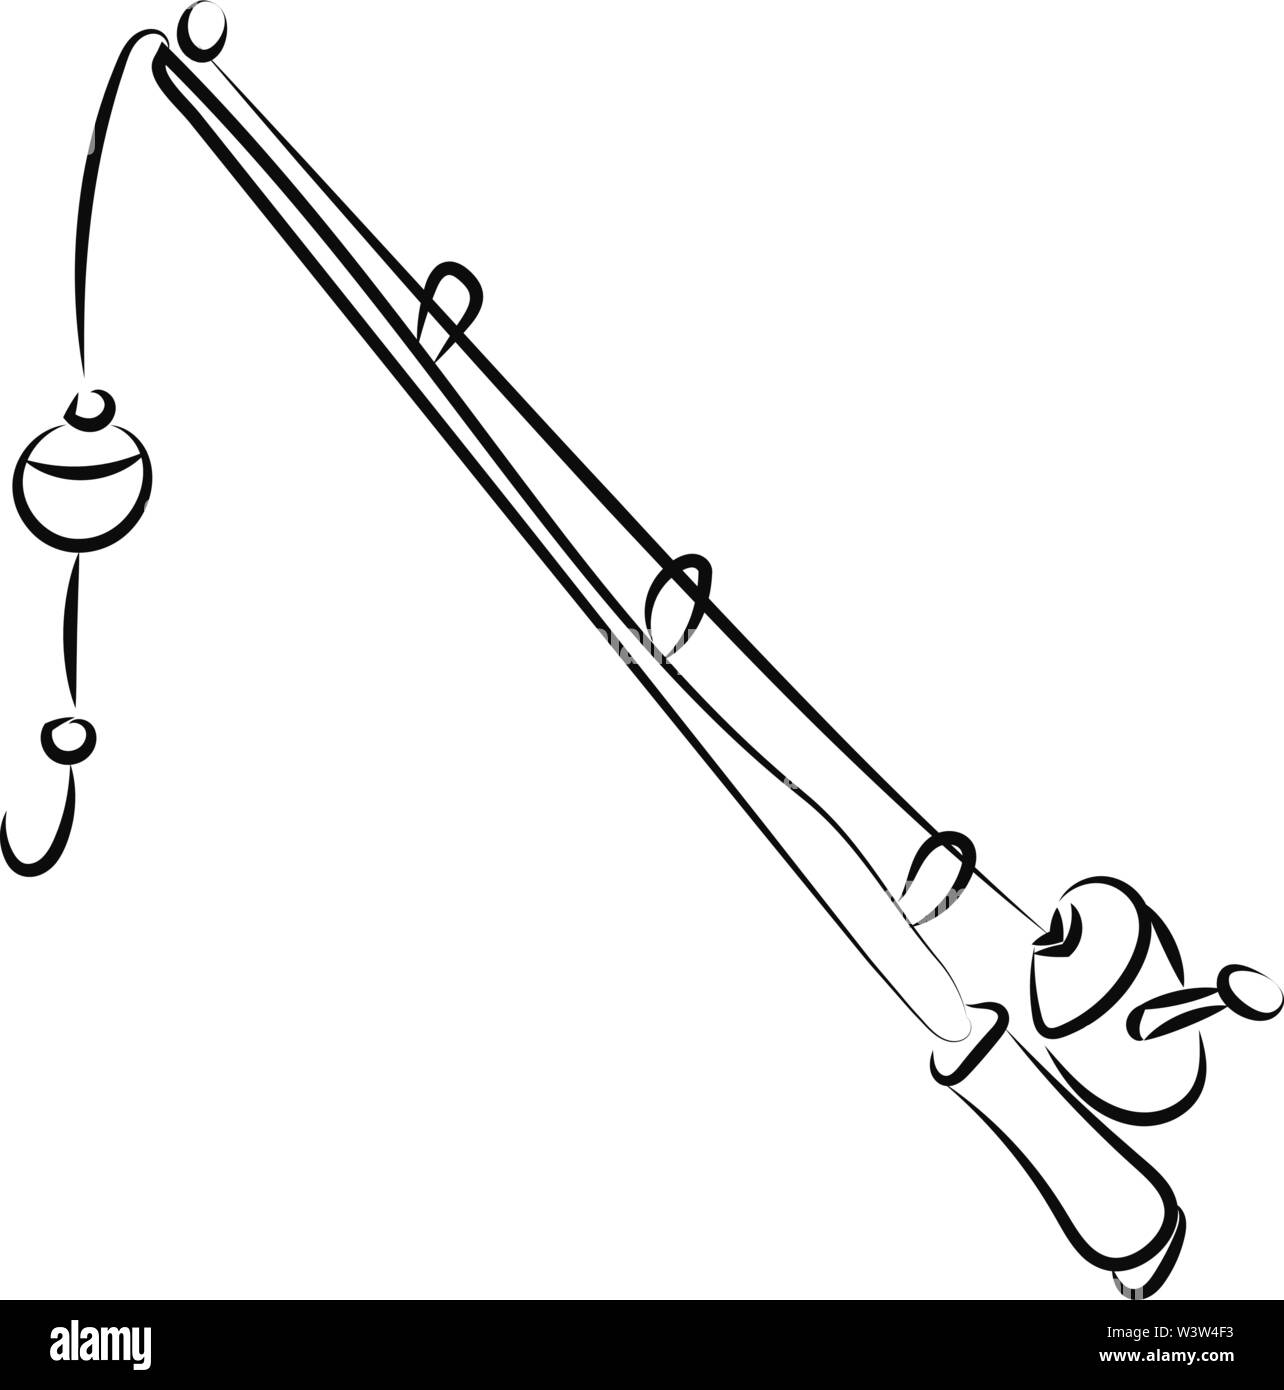 Fishing rod drawing, illustration, vector on white background